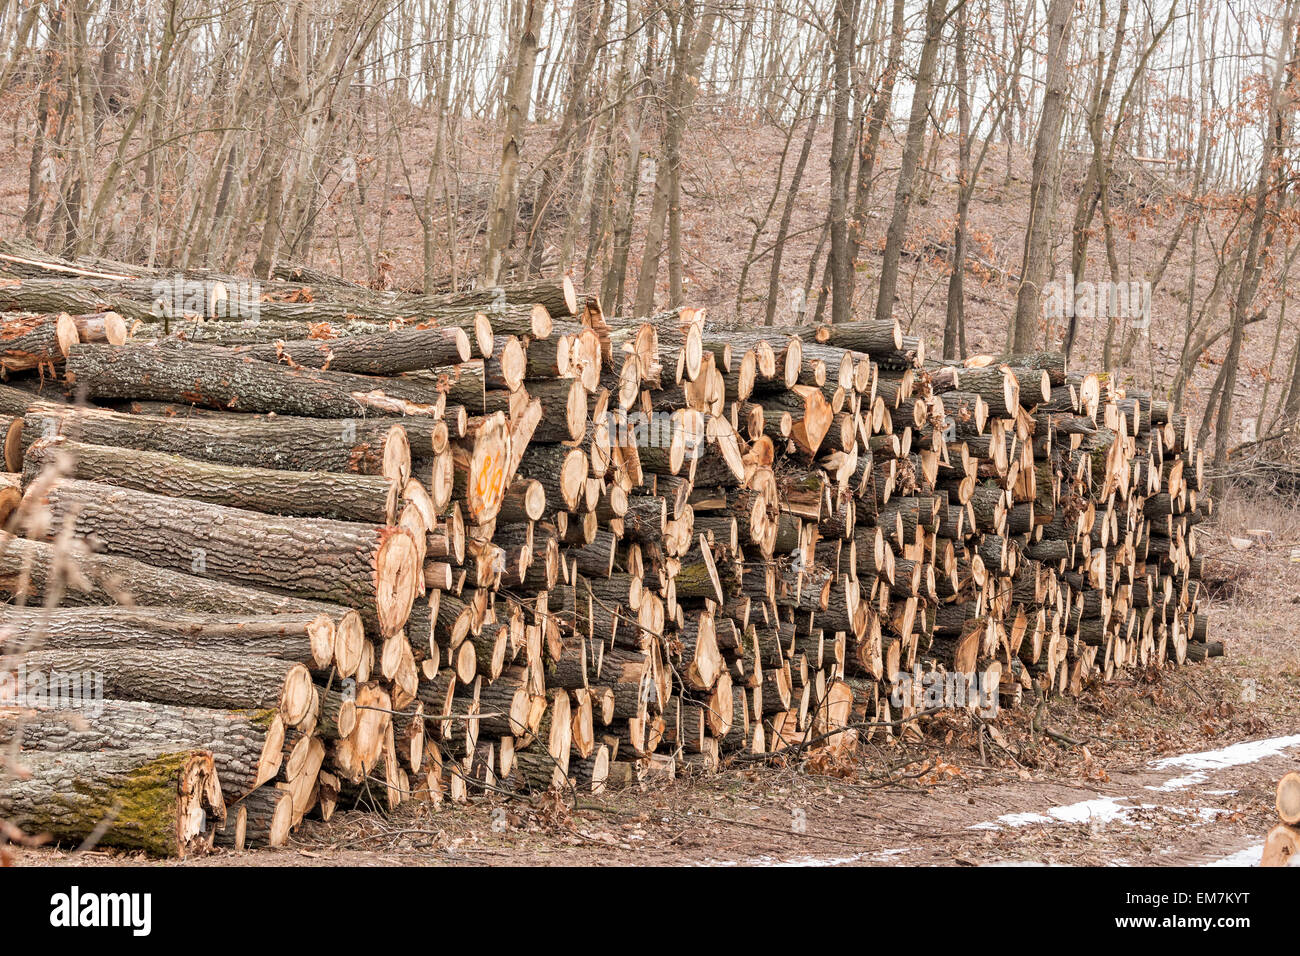 Big pile of wood in the forest Stock Photo